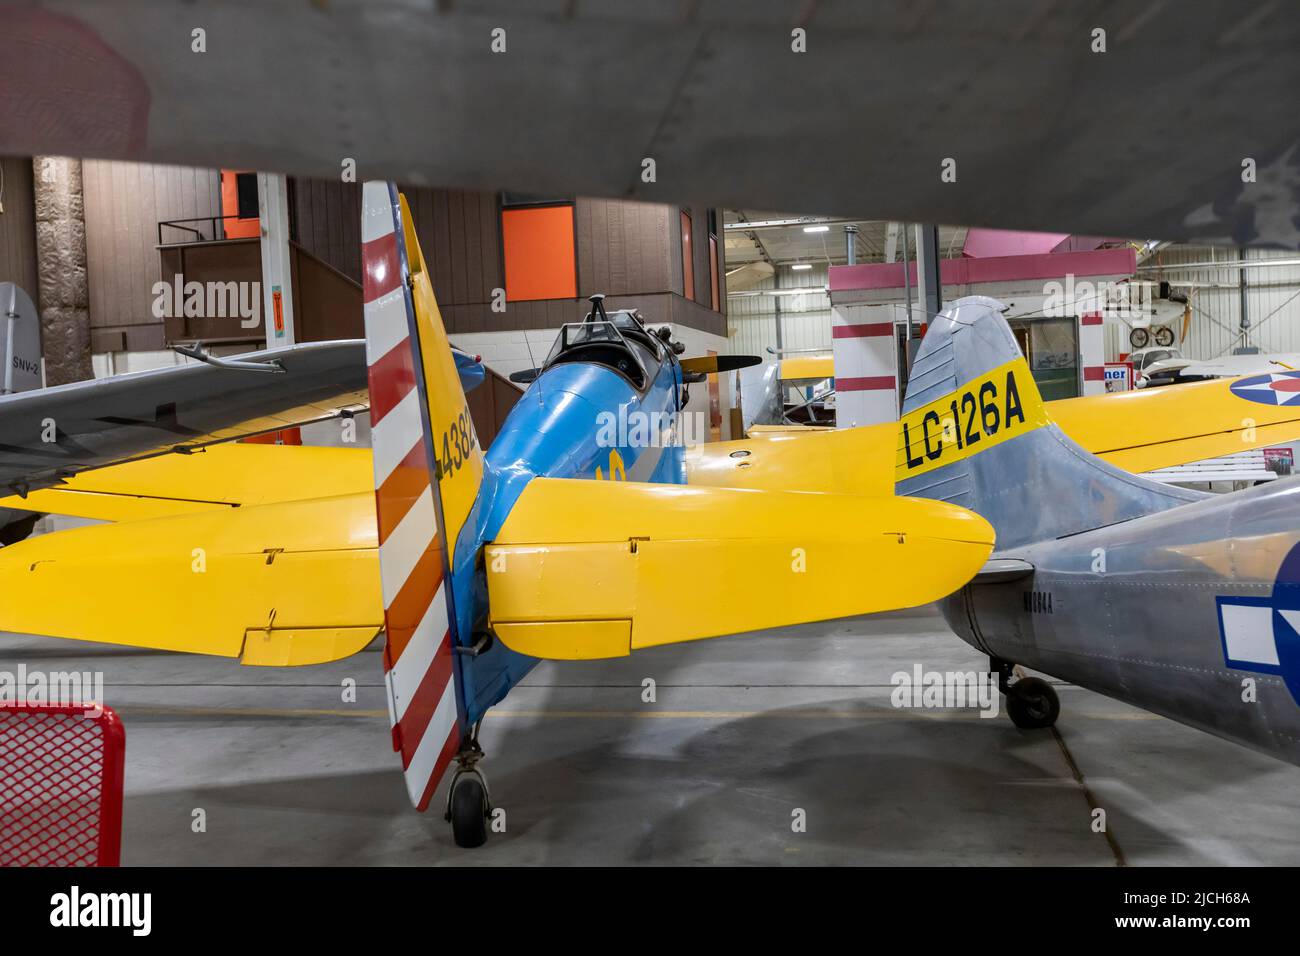 Liberal, Kansas - The Mid-America Air Museum. The museum displays over 100 aircraft. Stock Photo